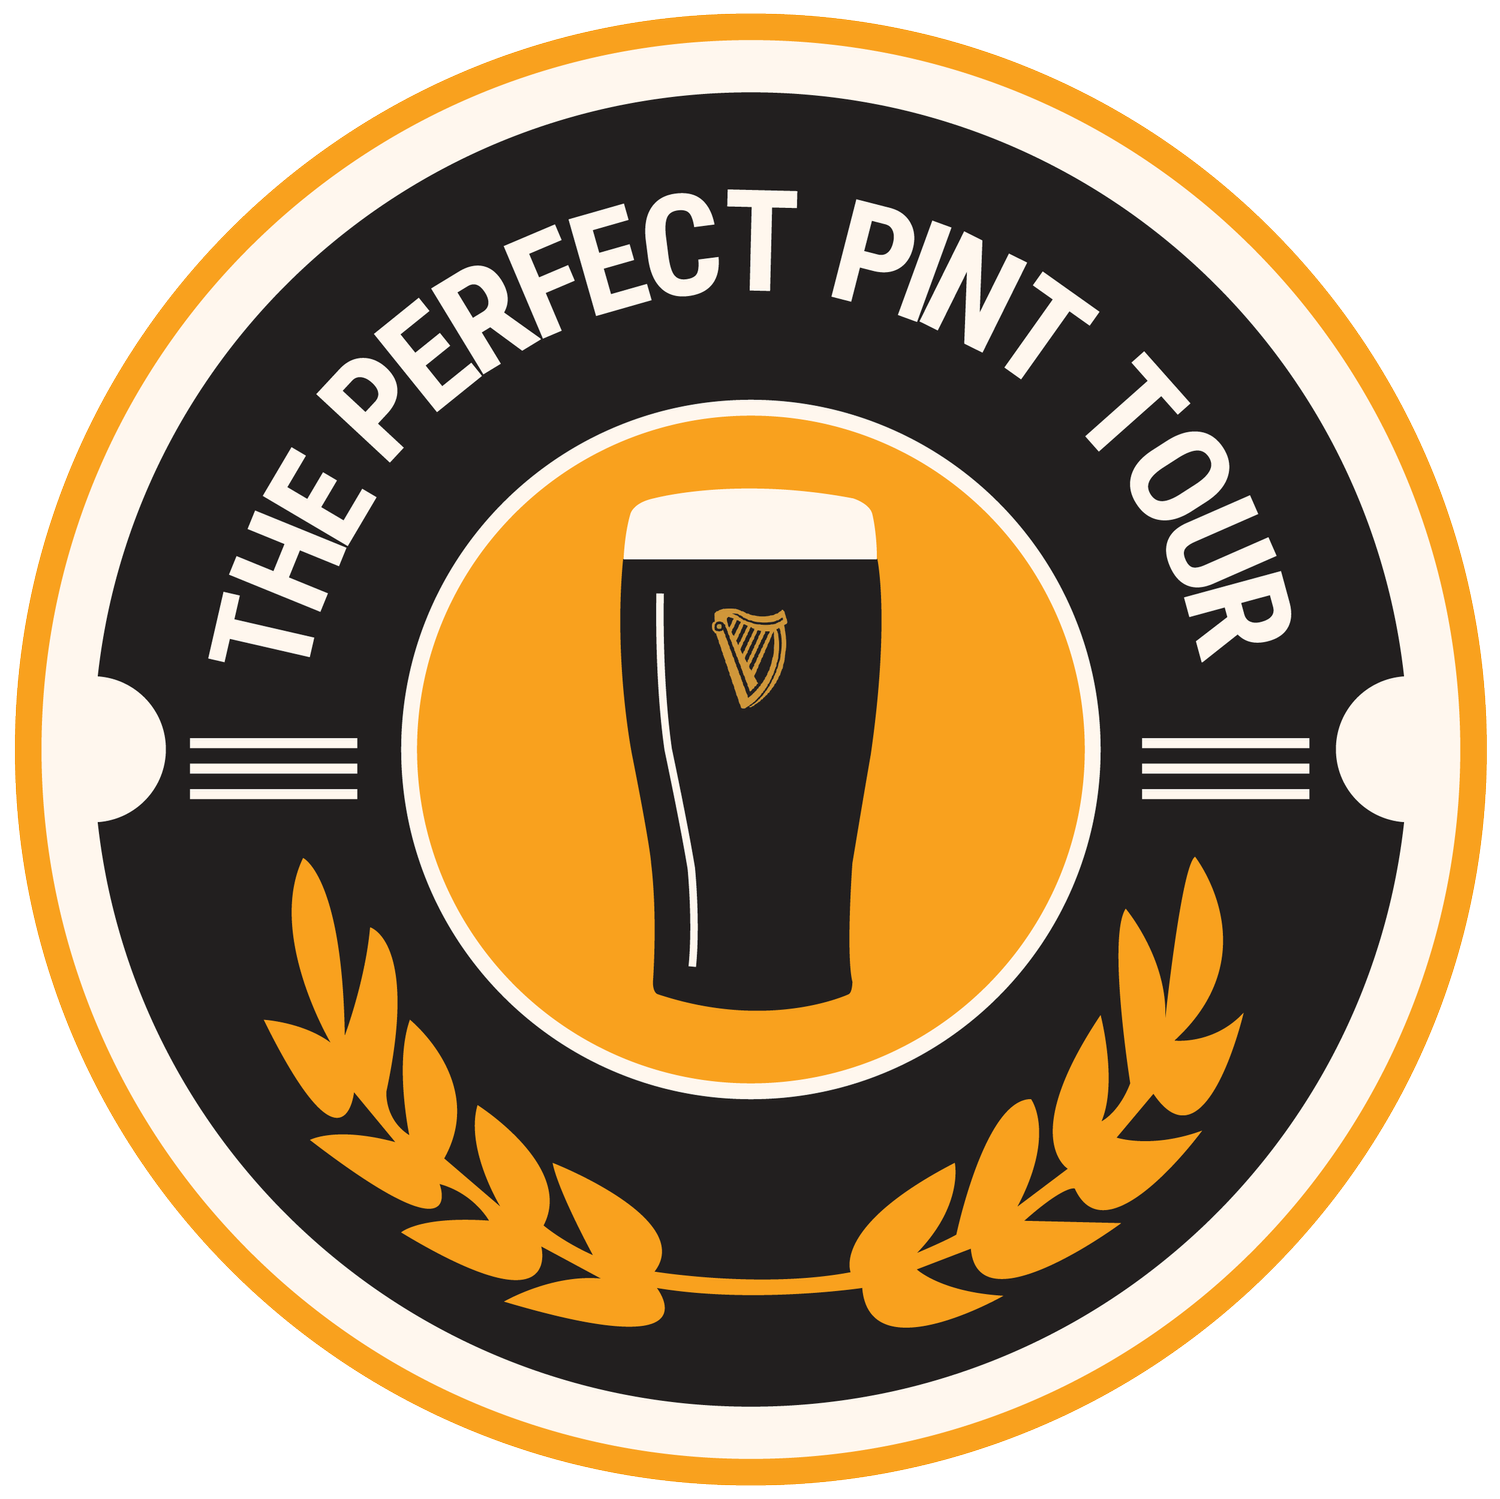 THE PERFECT PINT TOUR